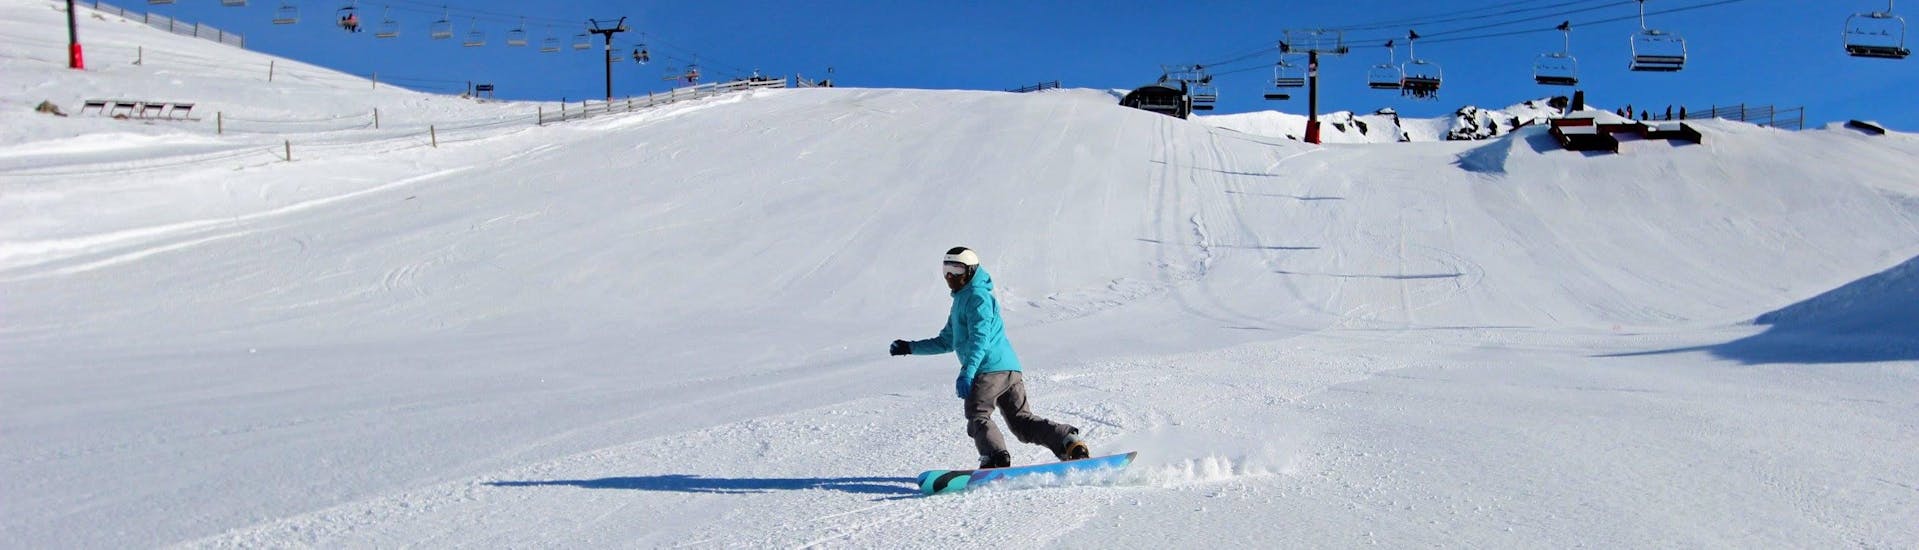 Snowboarding Lessons "Lowriders" (7-14 y.) - With Transfer.